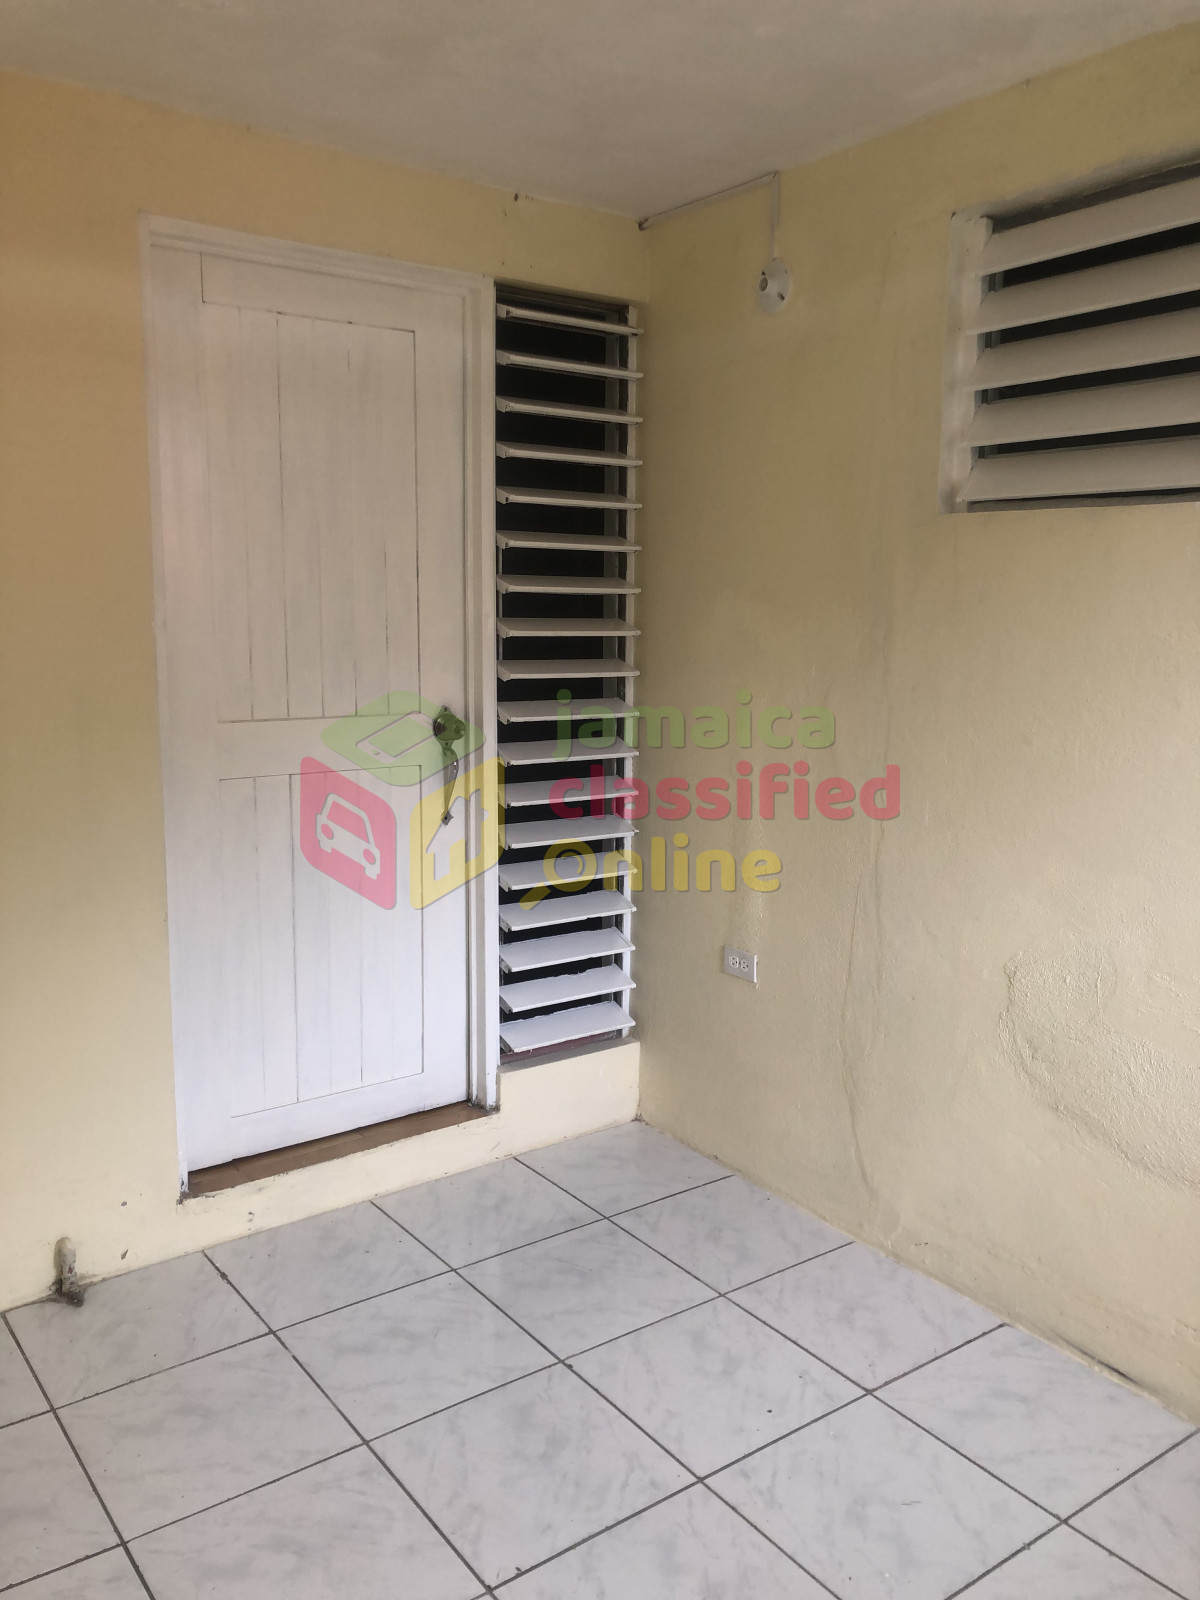 1 Bedroom Single Working Females Only For Rent In Red Hills Road